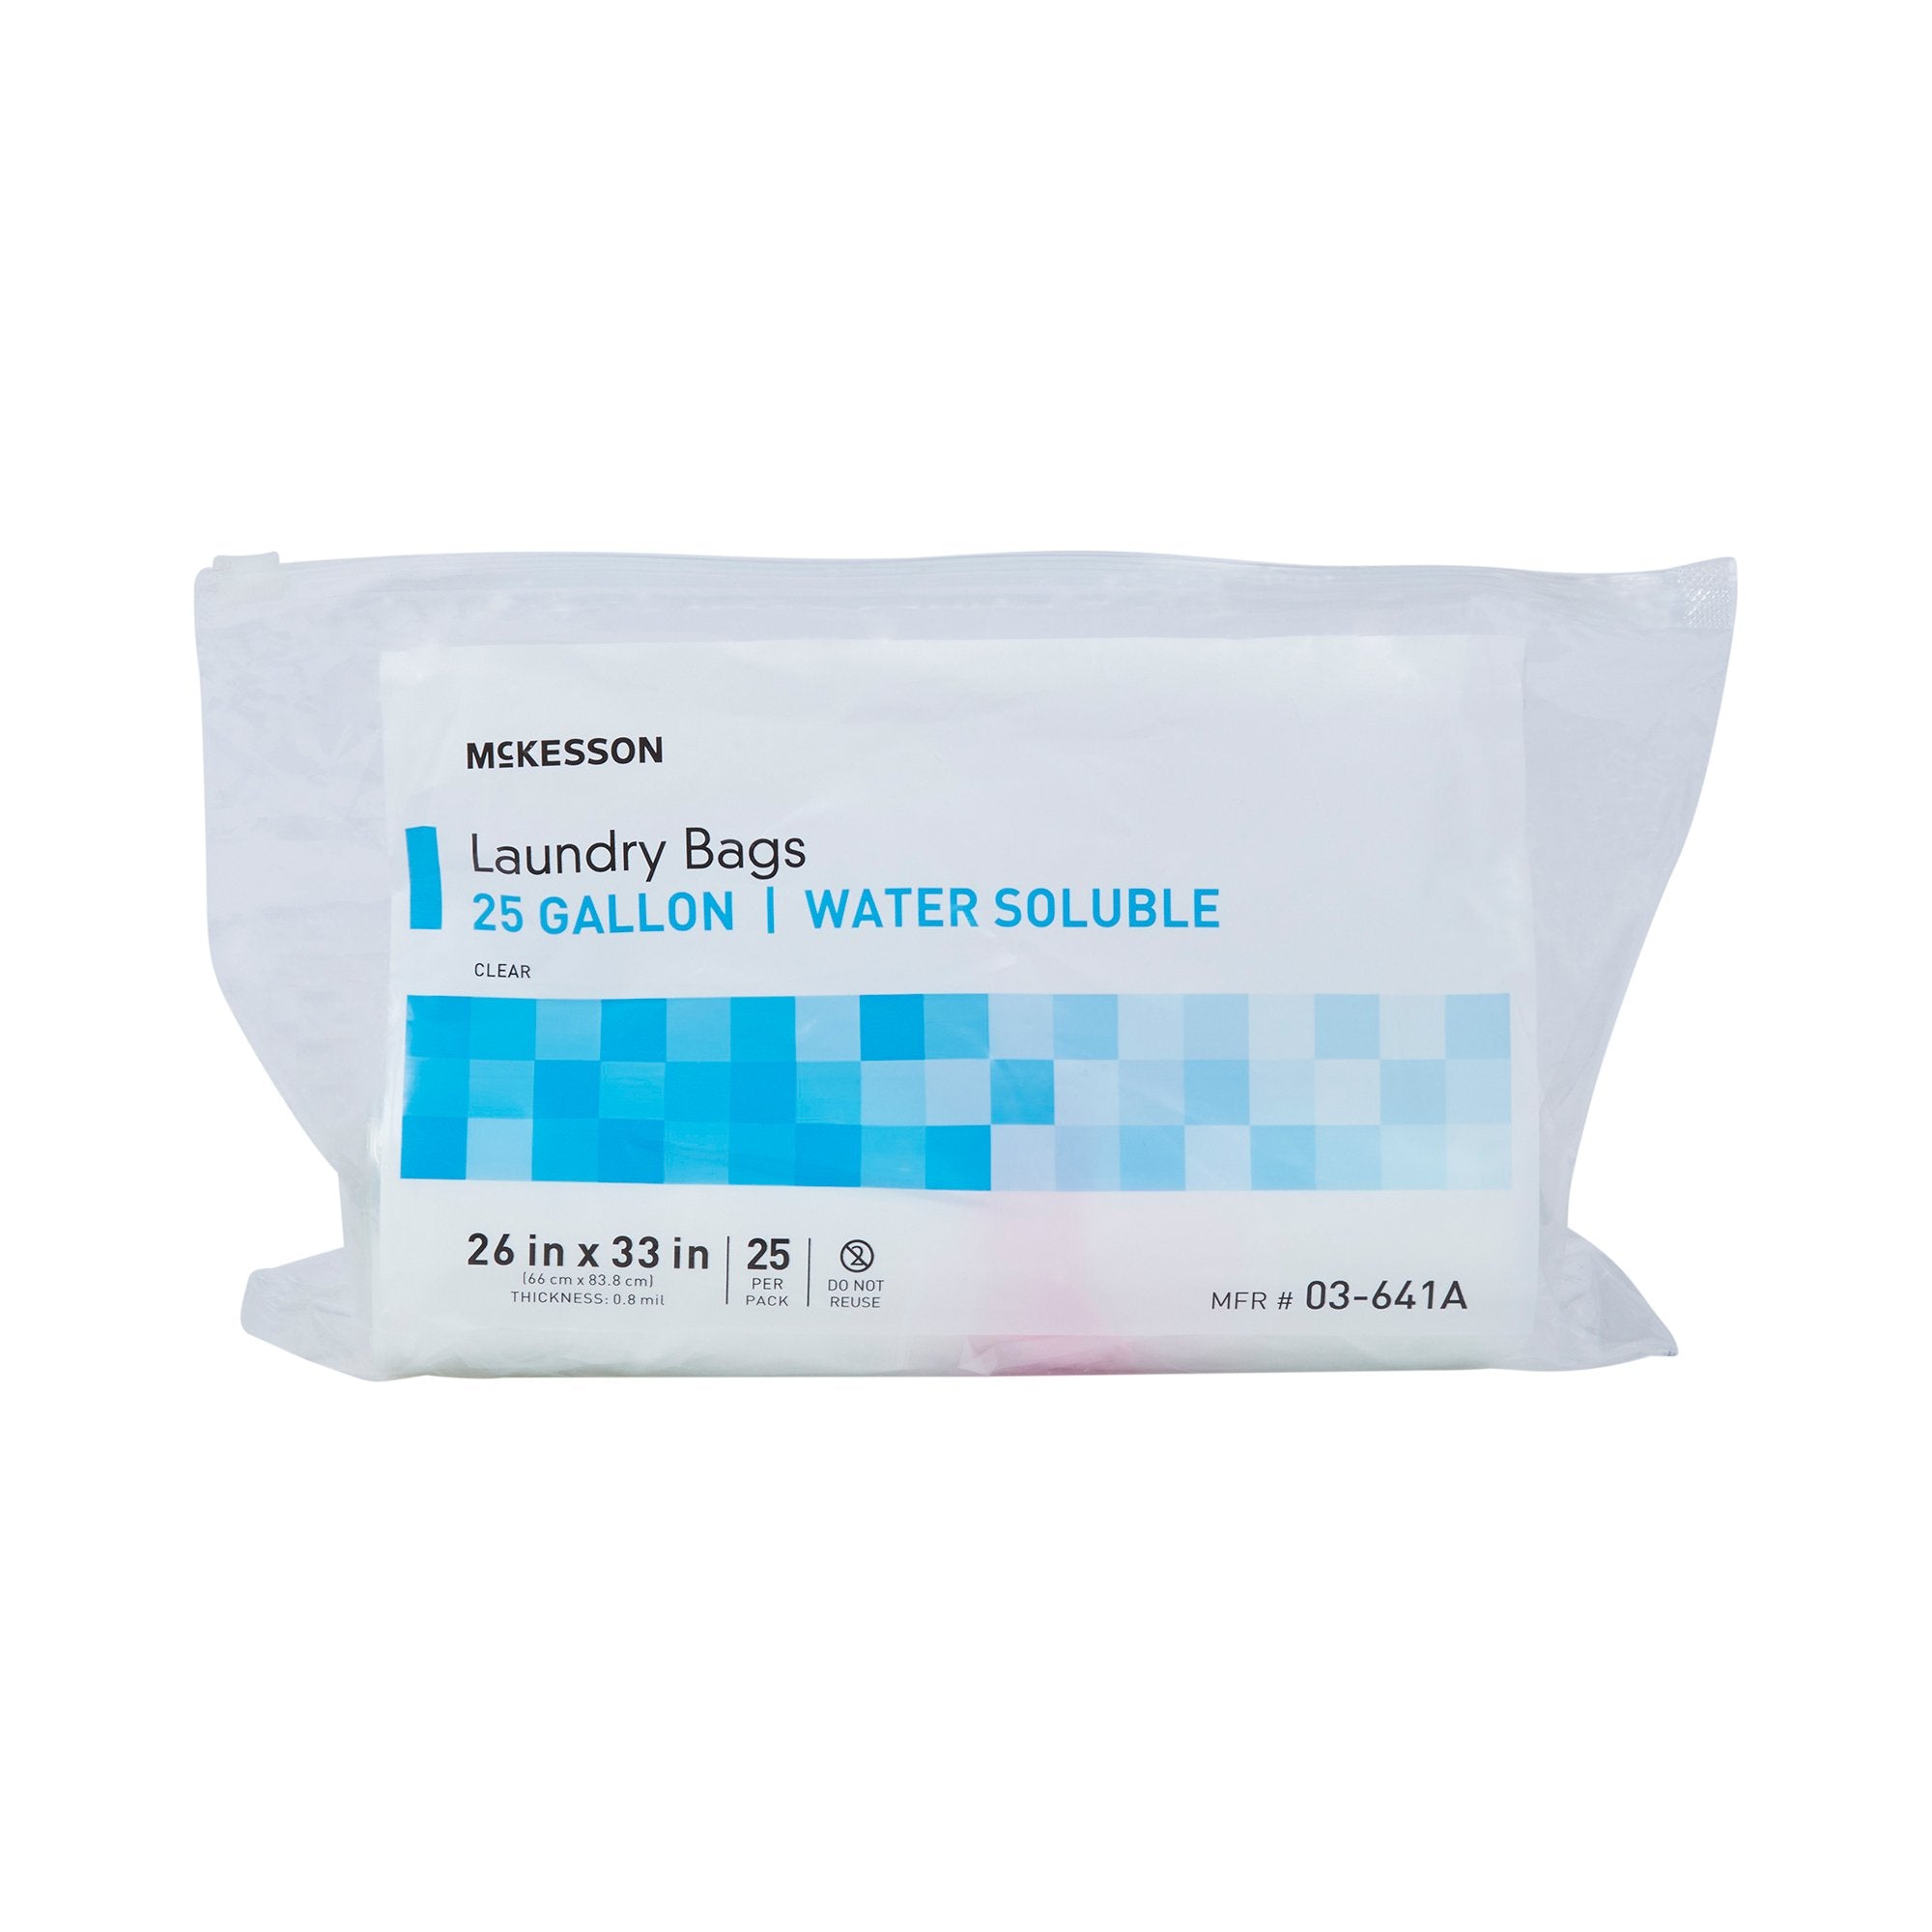 McKesson Water Soluble Laundry Bag, 20-25 gal Capacity (25 Units)